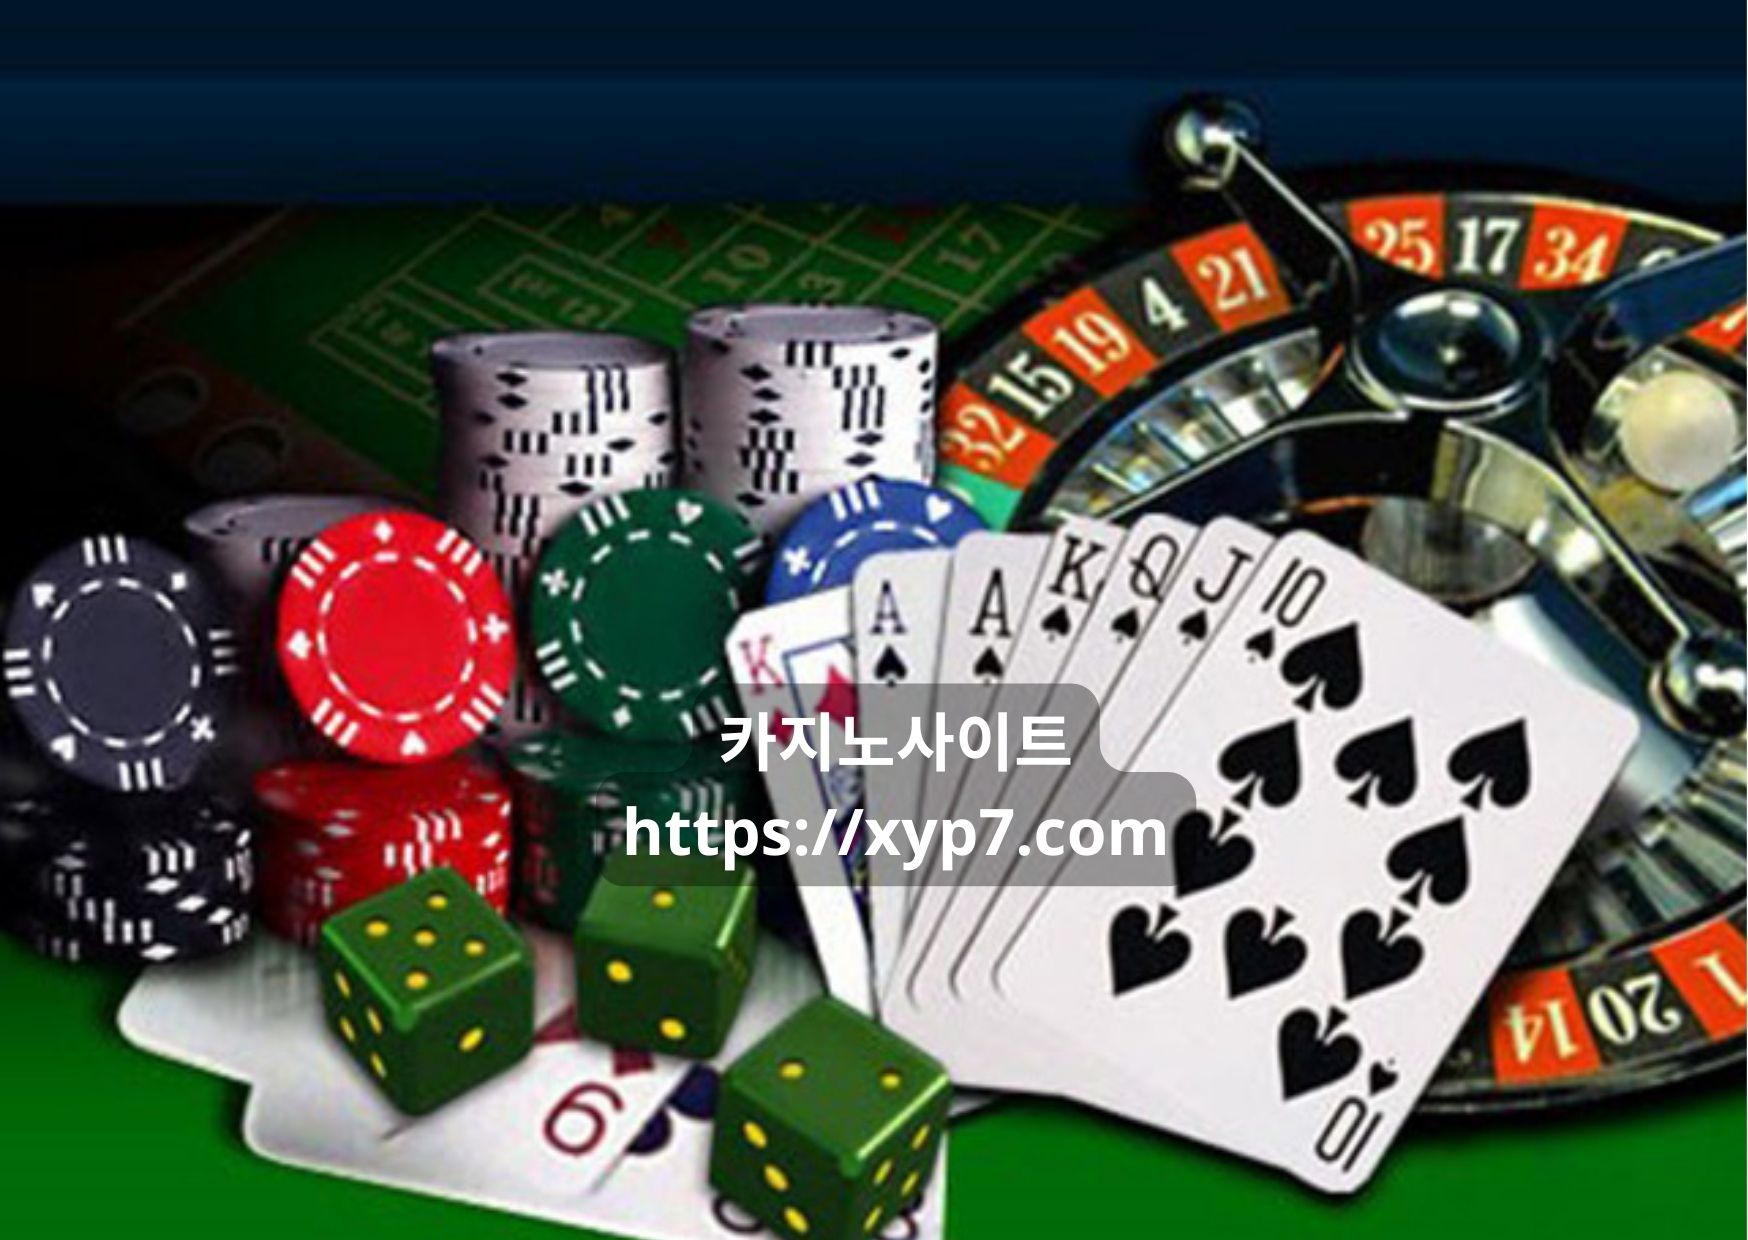 Trusted Online Casino Reviews For Casino Players